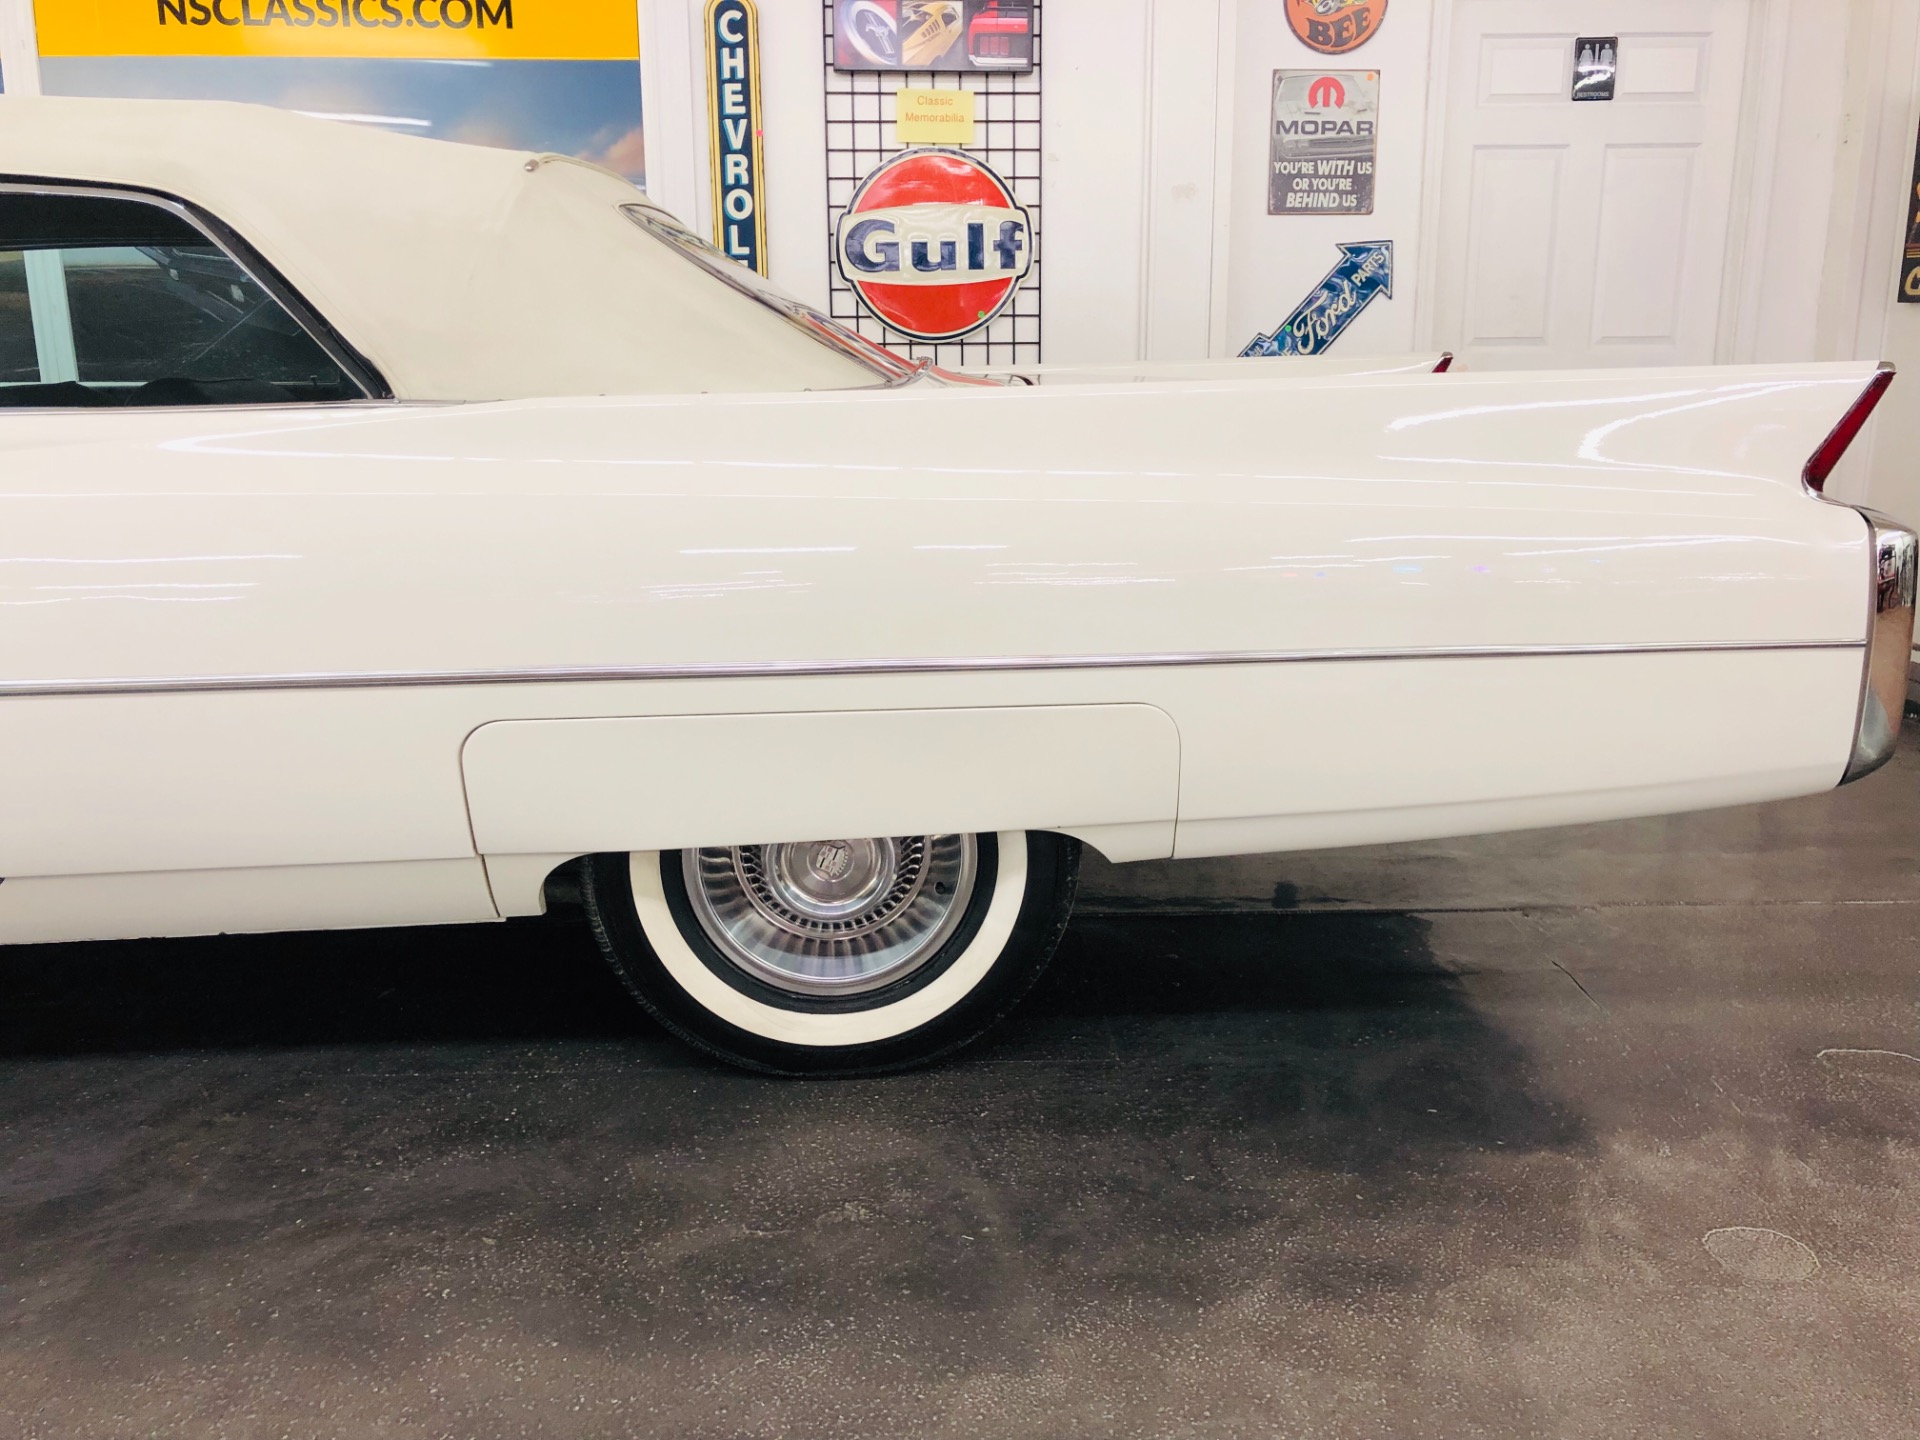 Used 1963 Cadillac DeVille -FRAME OFF RESTORED 2017 CONVERTIBLE FUN-NUMBERS MATCHING- | Mundelein, IL